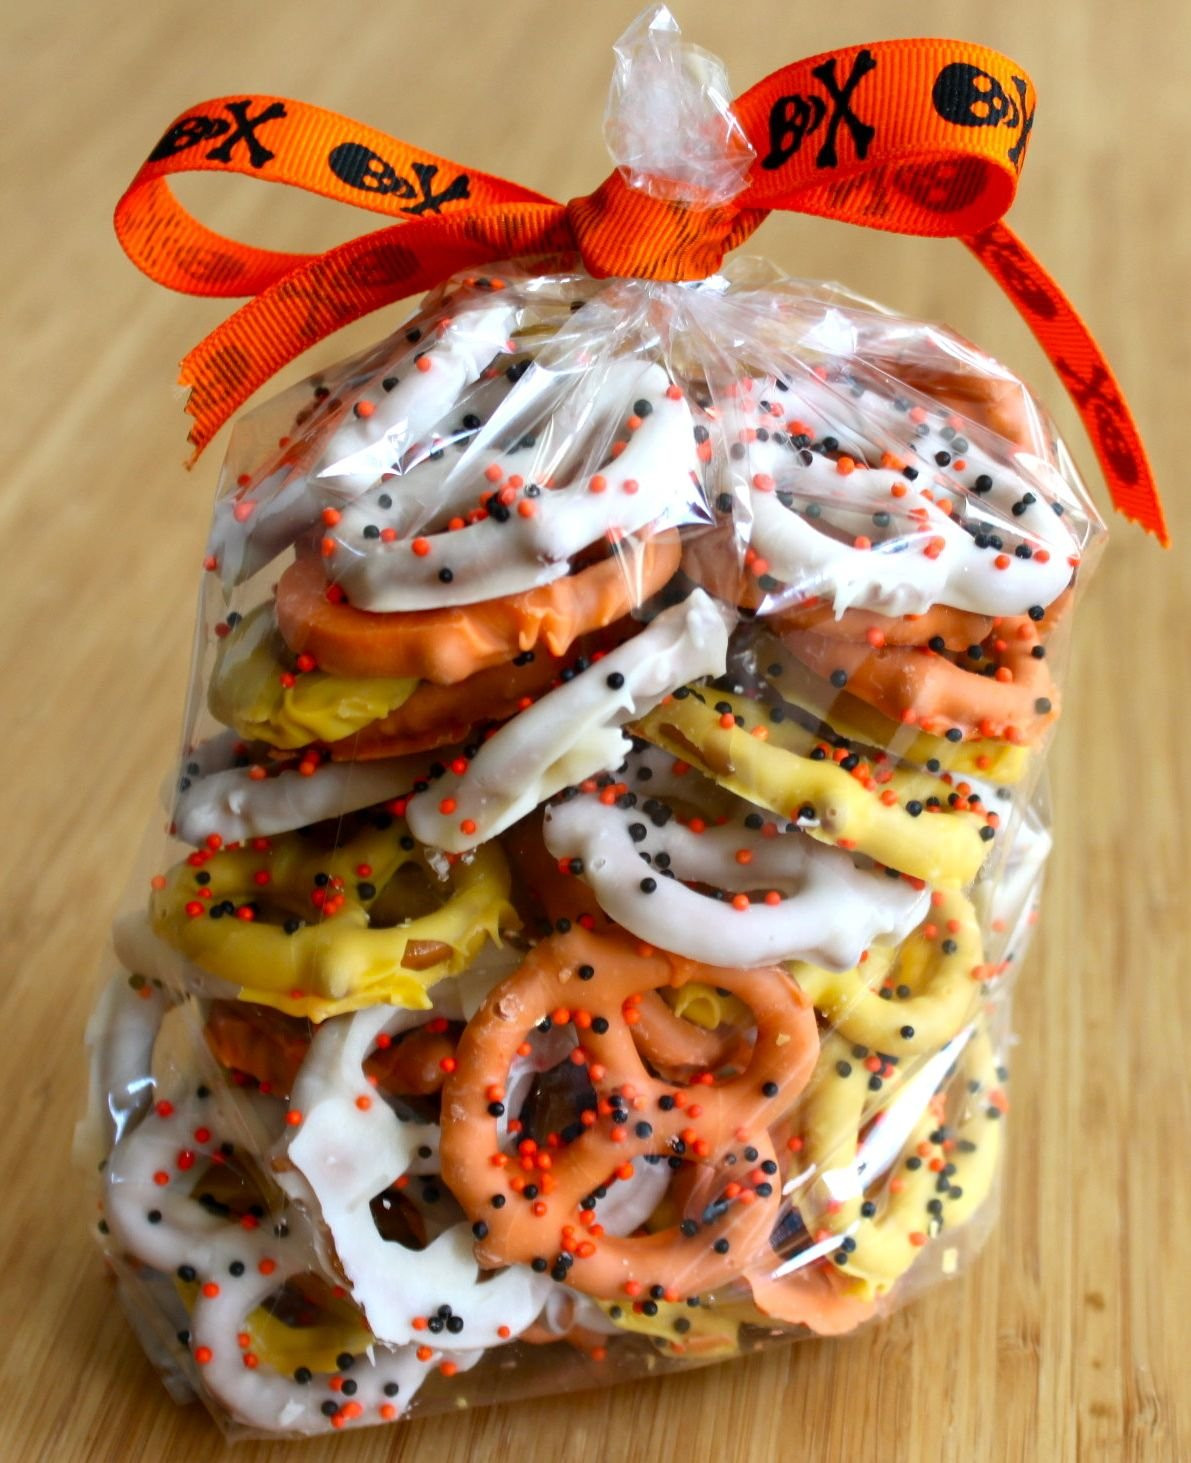 Chocolate Dipped Pretzels For Halloween
 The Homesteading Cottage 31 Days Prepare for Halloween